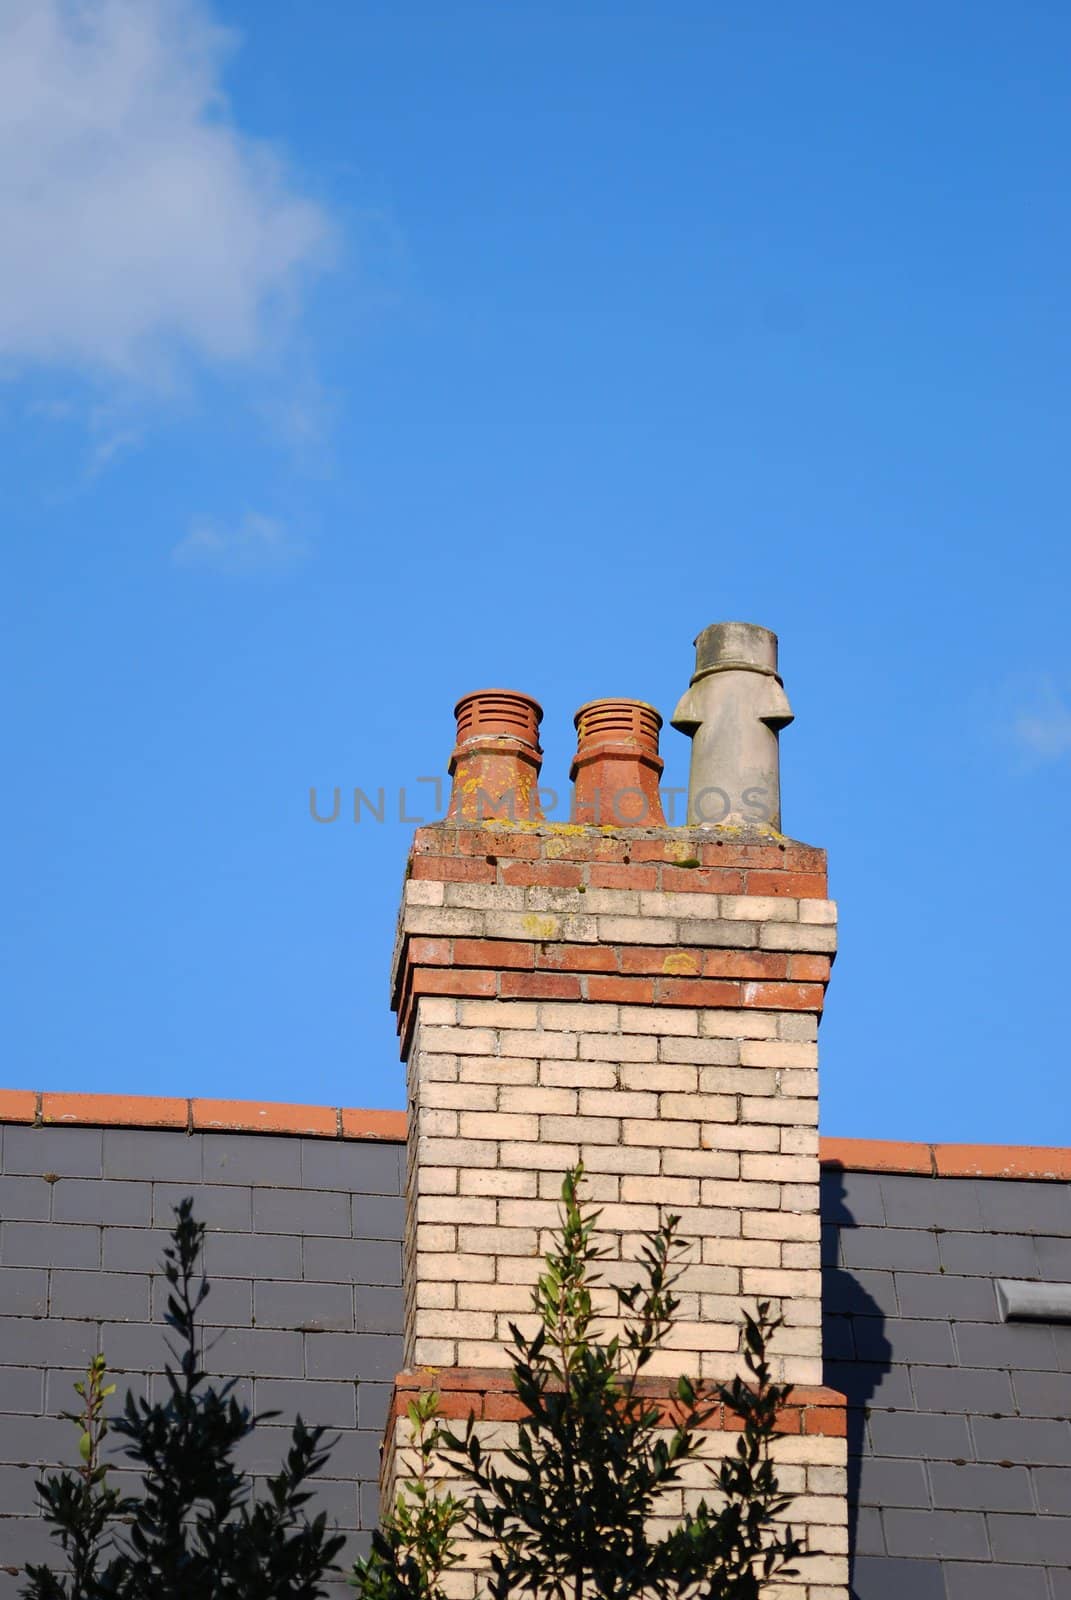 smokestacks on the roof and blue sky with white clouds